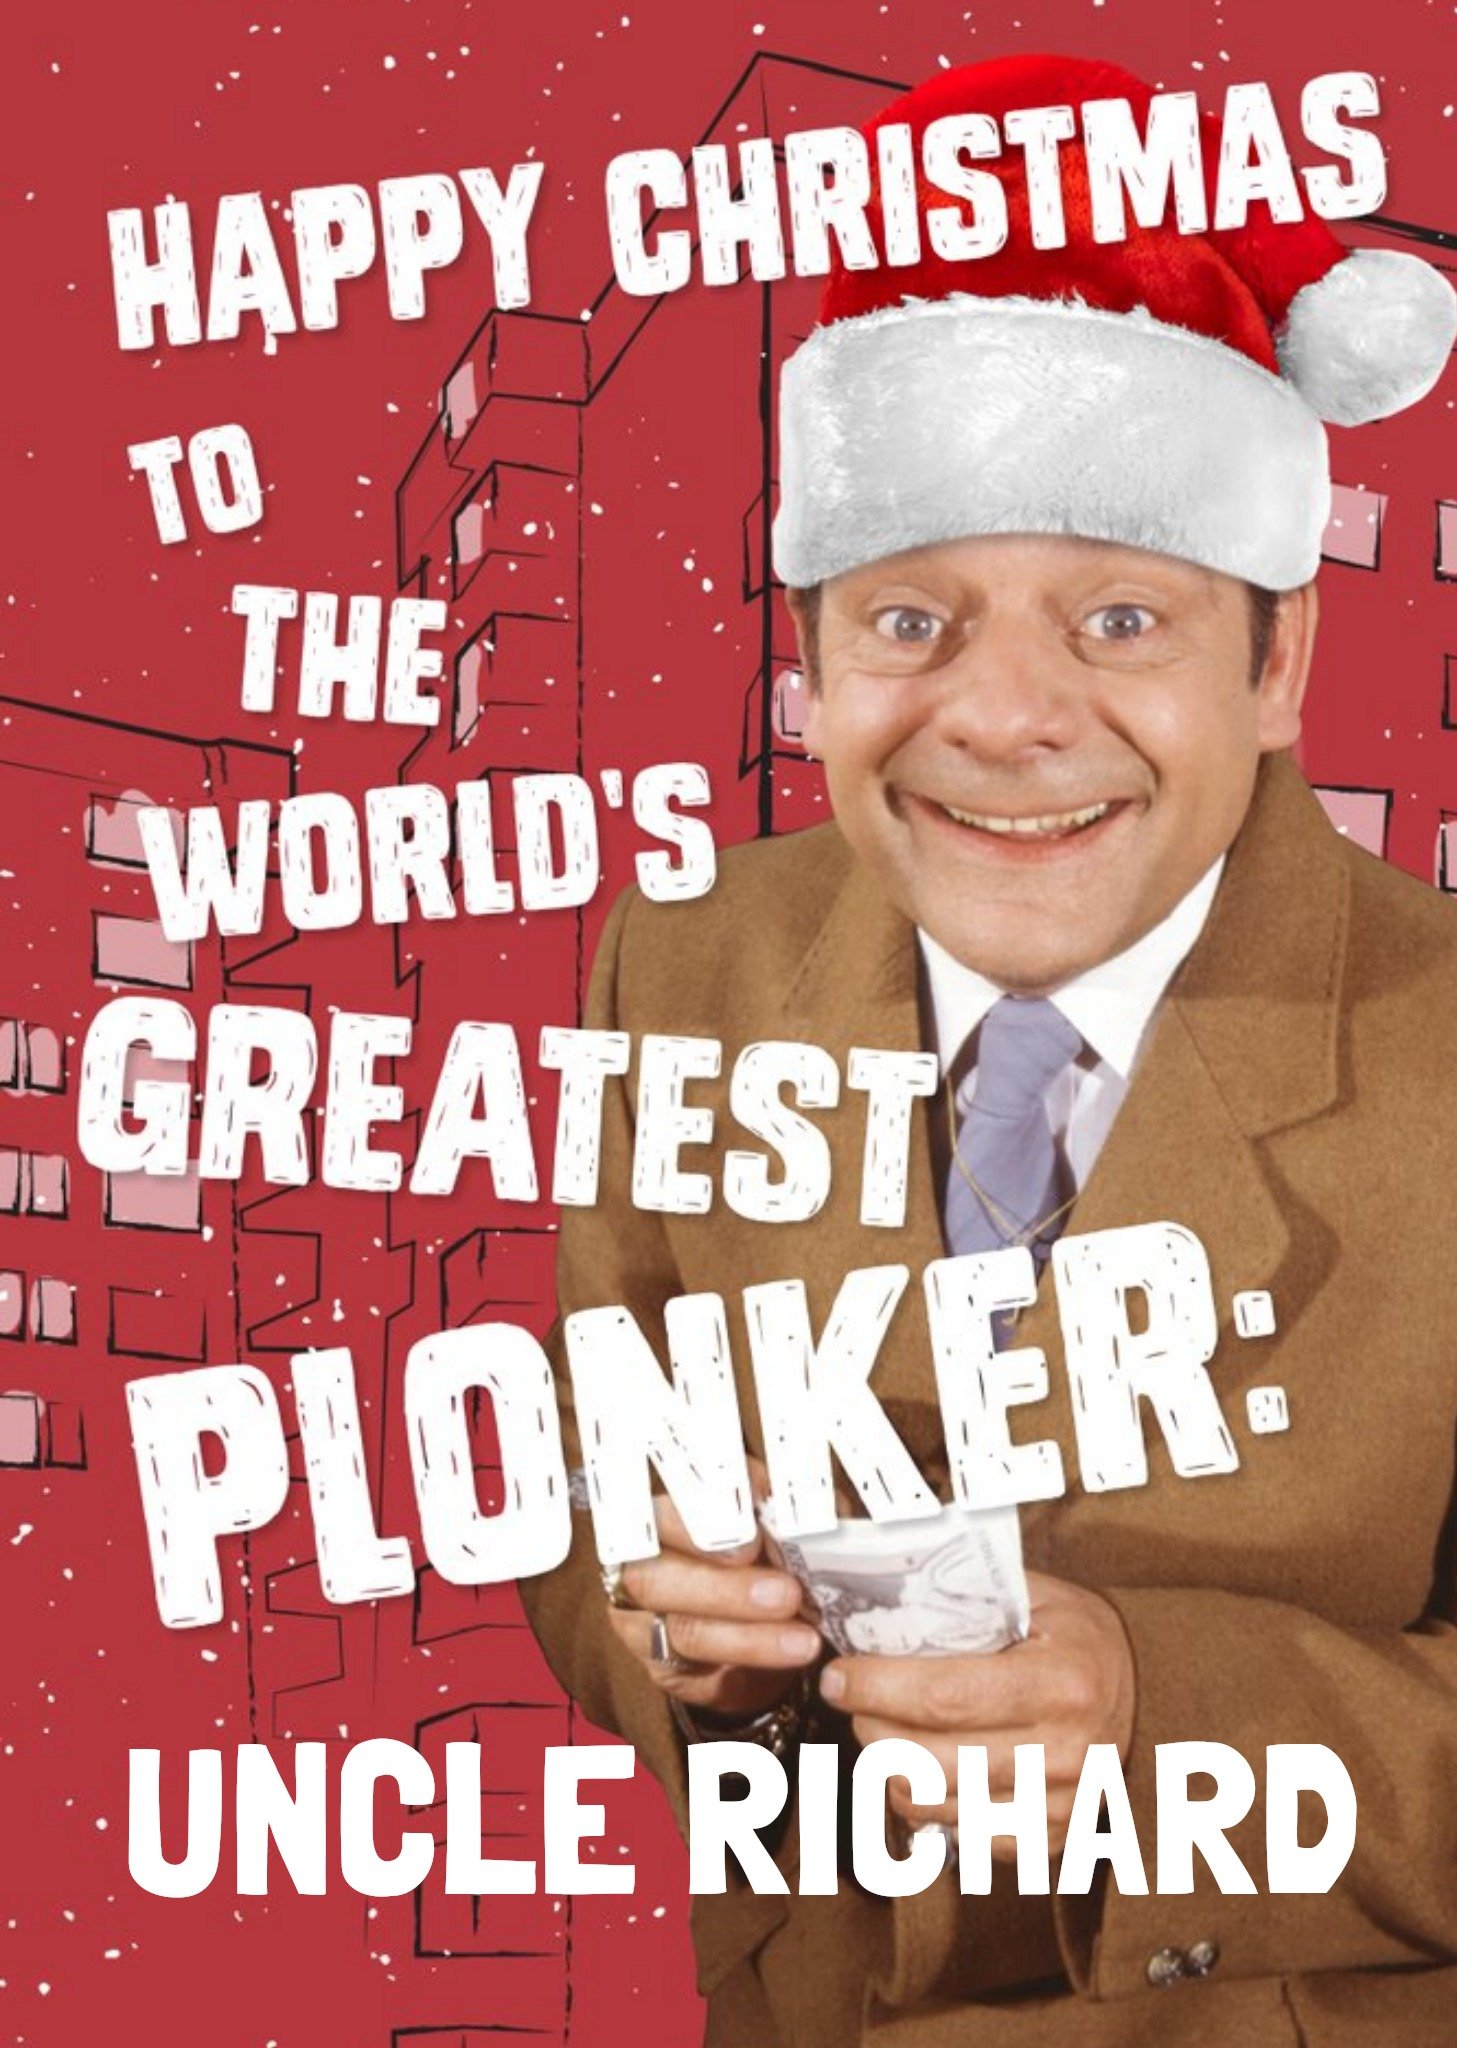 Bbc Only Fools And Horses World's Greatest Plonker Funny Christmas Card Ecard